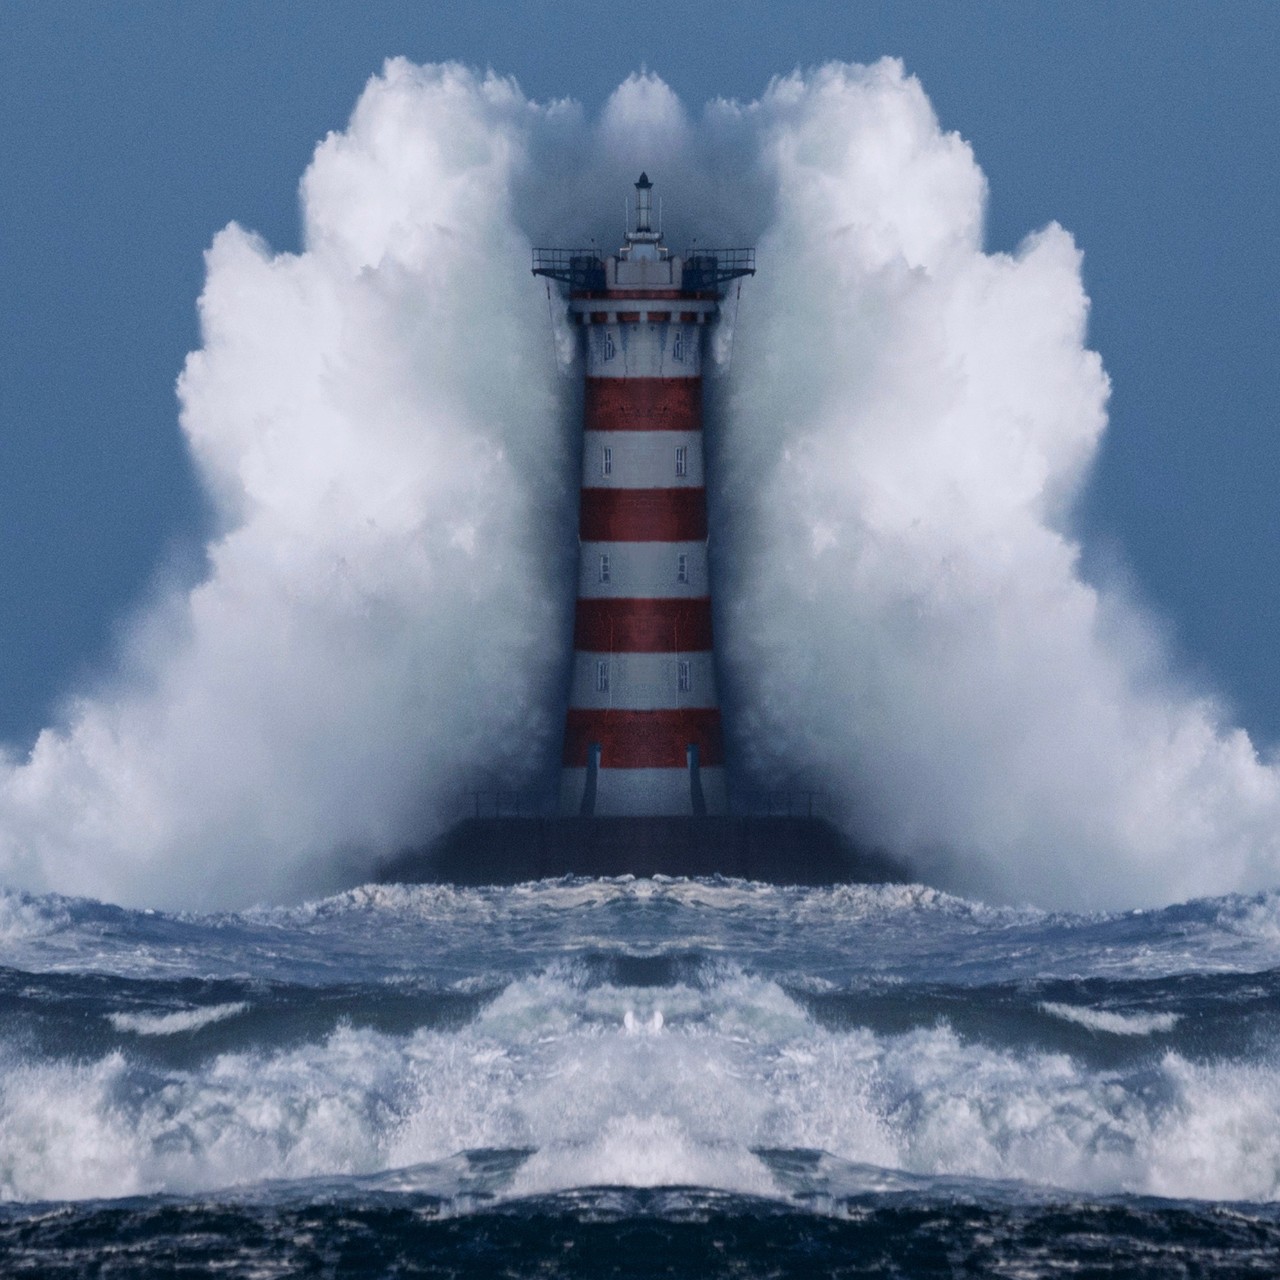 This image was taken during winter 2018 when the Storm Fionn arrived on the west coast of France. The waves were more than 10m high.
We can see a beautiful lighthouse striked by a huge wave.
It was in Porspoder in Brittany.